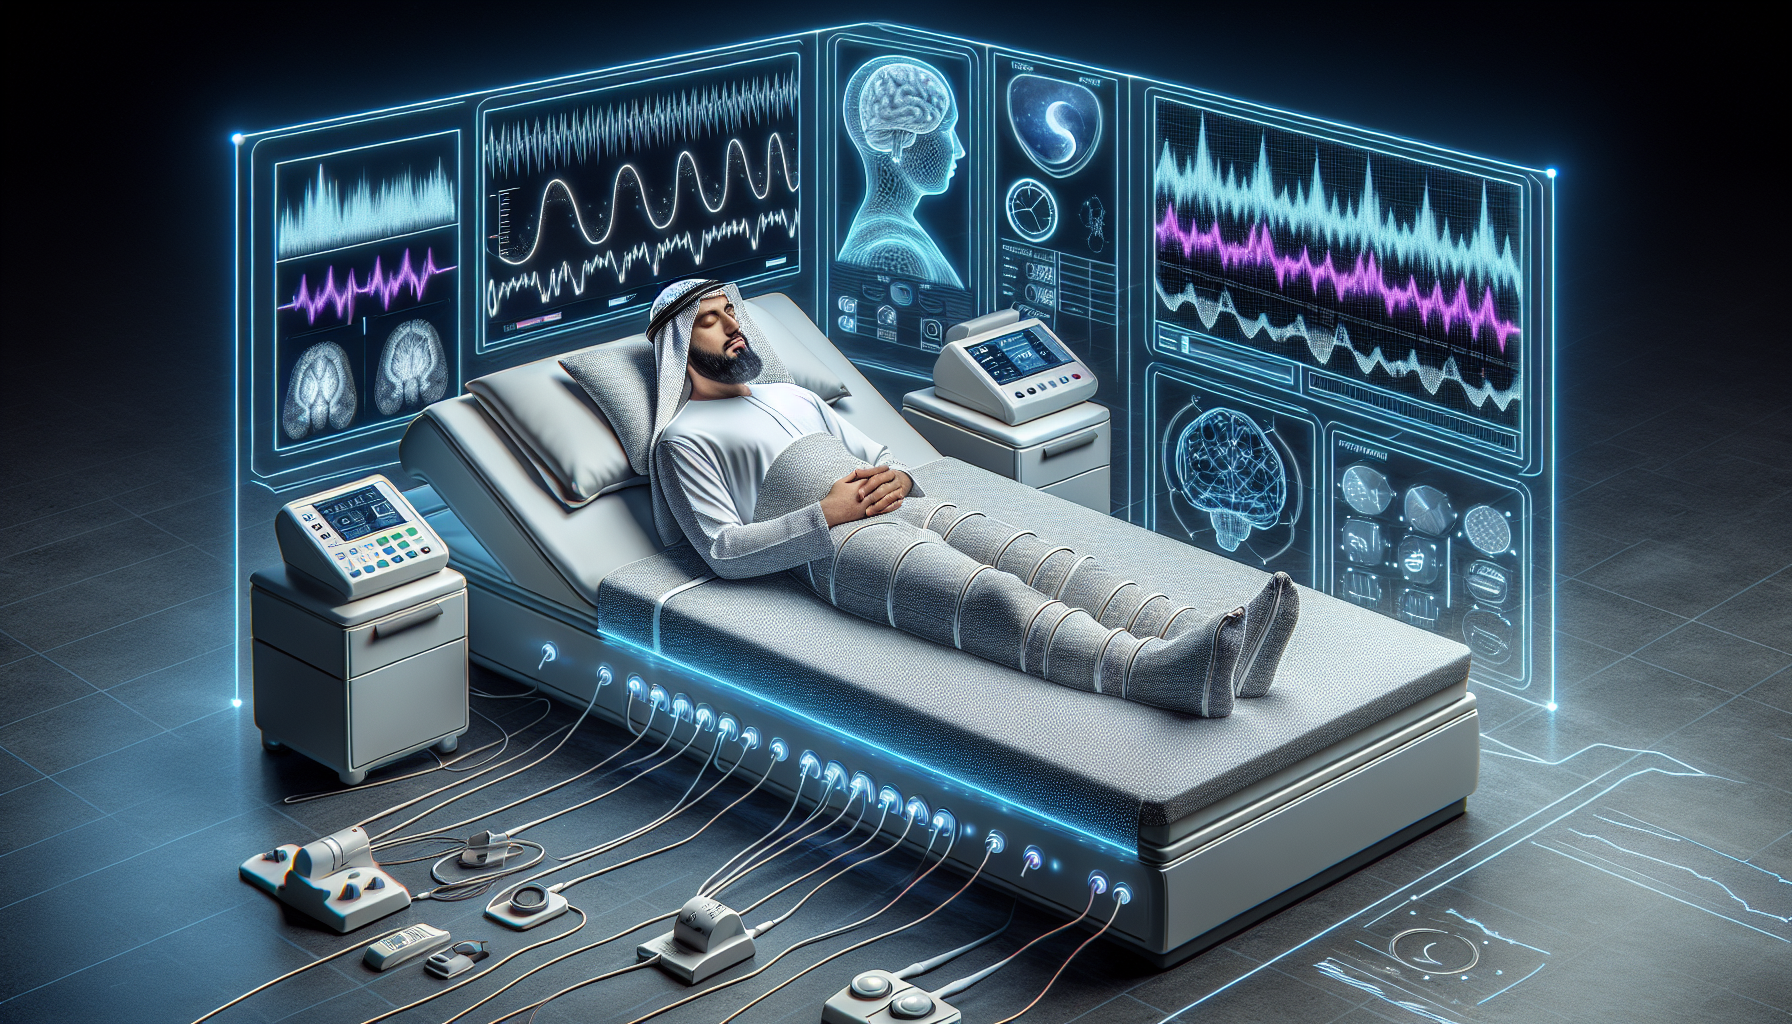 What You Need To Know About Sleep Studies And Diagnostics